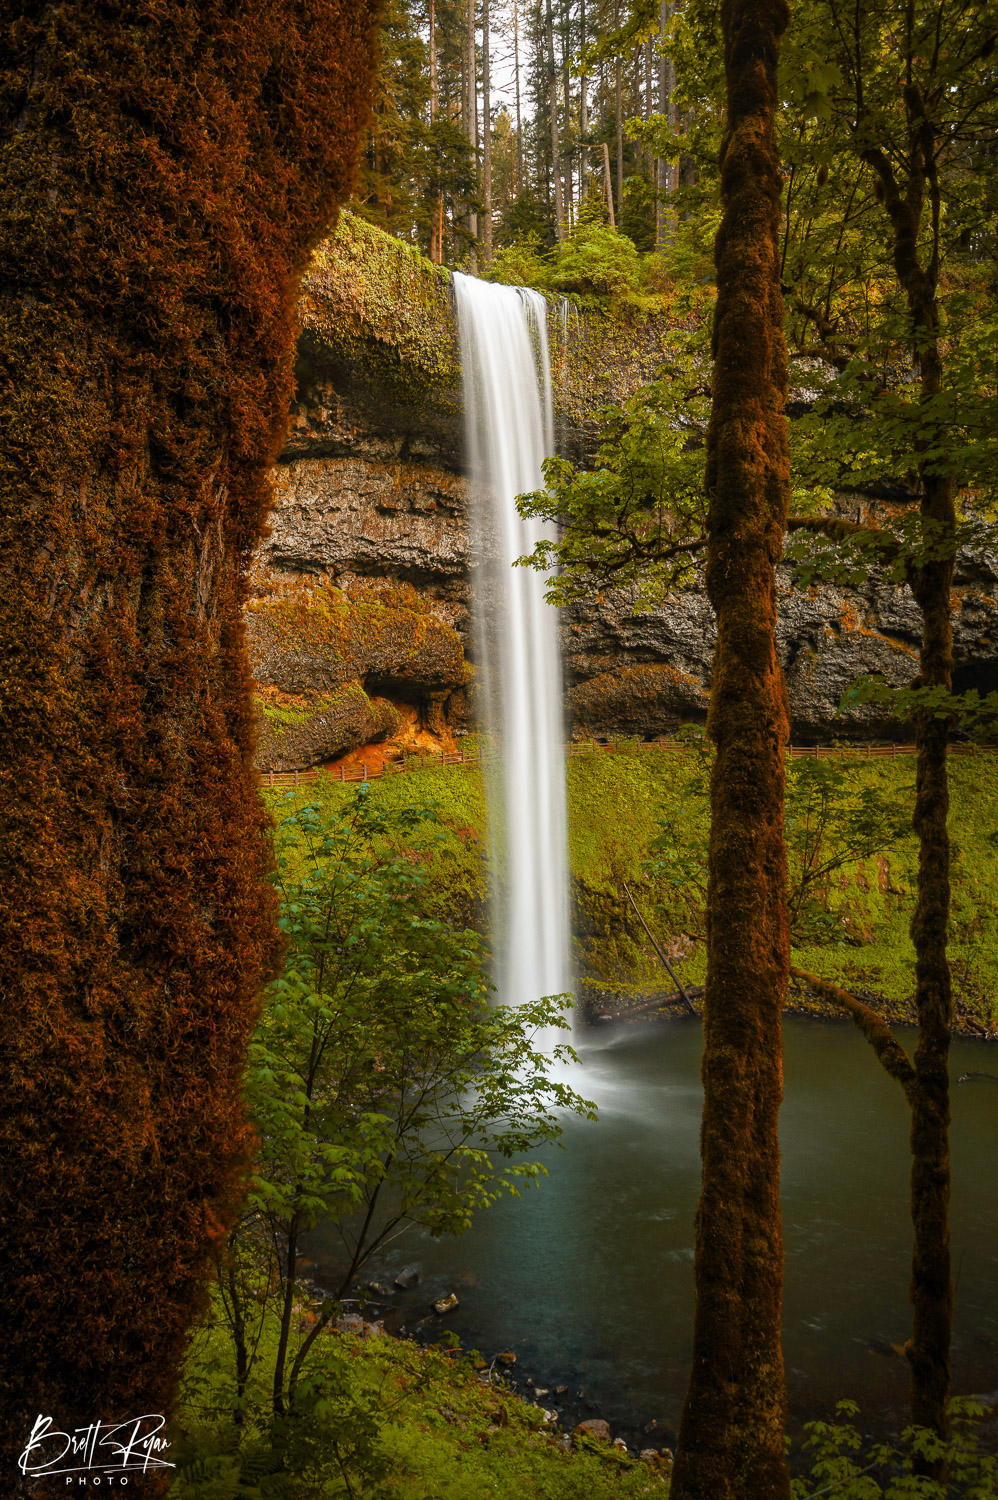 Image taken at South Falls in Silver Falls State Park. Limited Edition Print of 50.